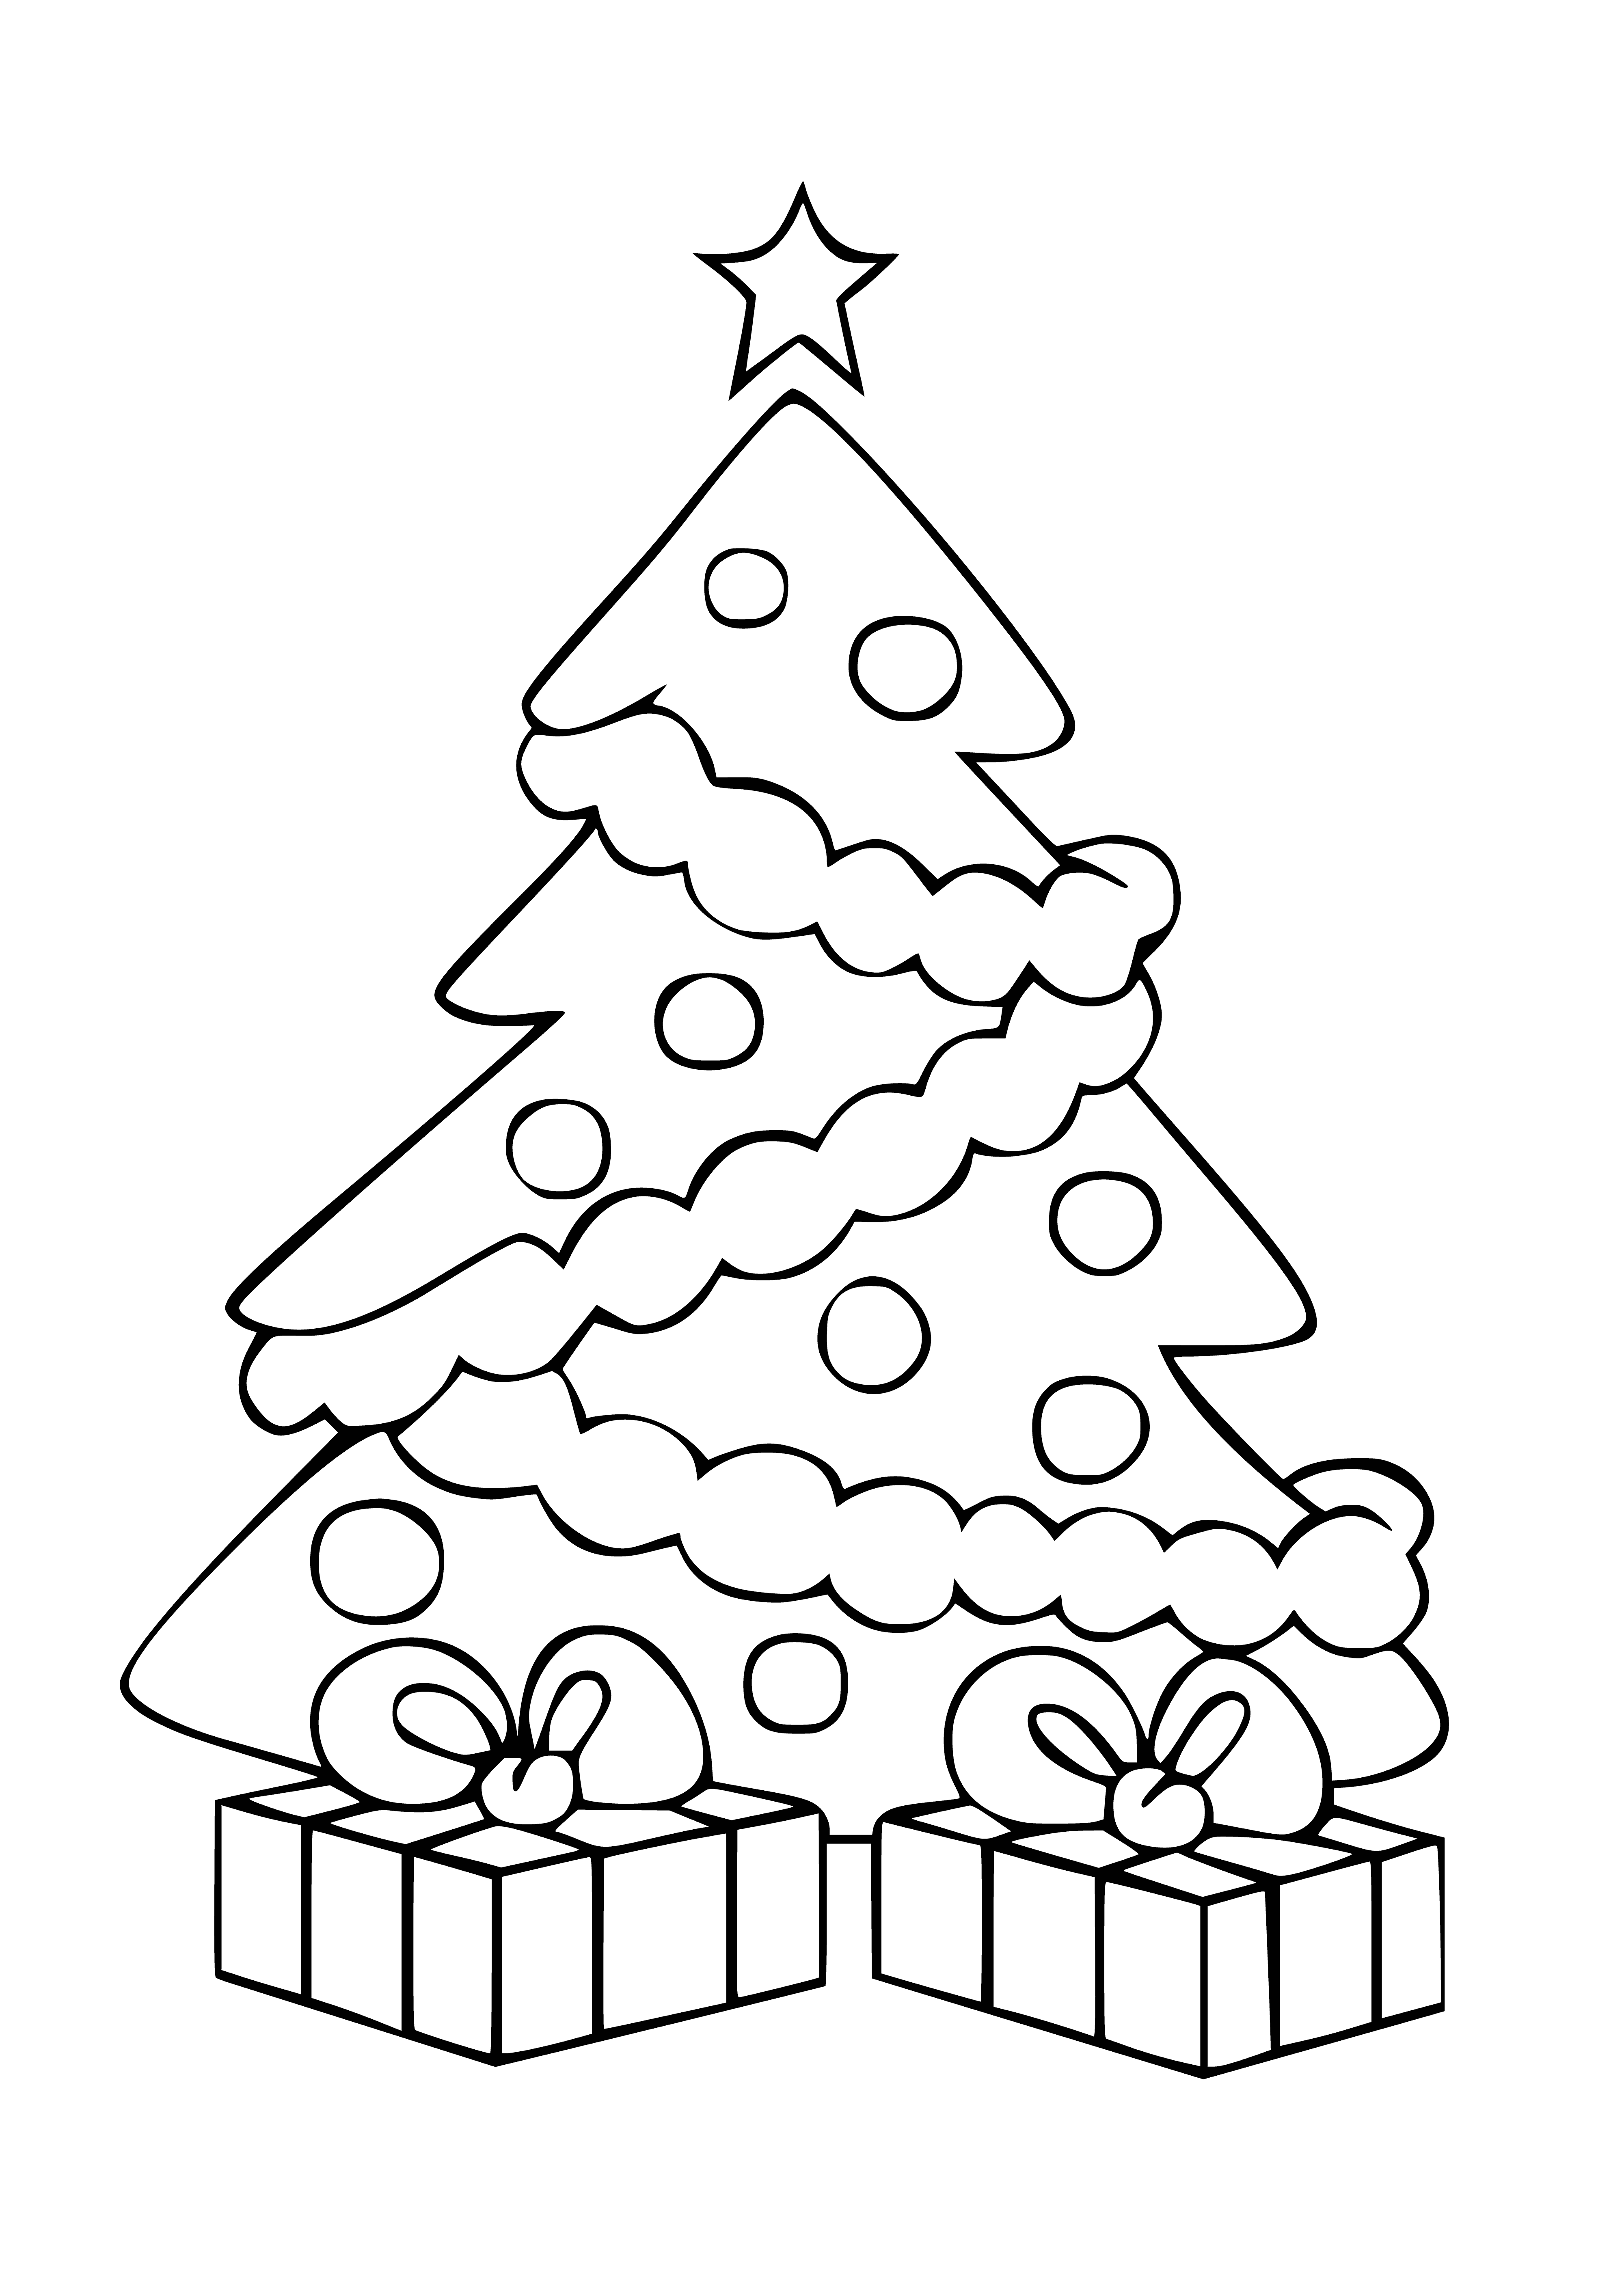 A decorated tree, usually evergreen, associated with Christmas, present since medieval times & gaining popularity in the 19th century.